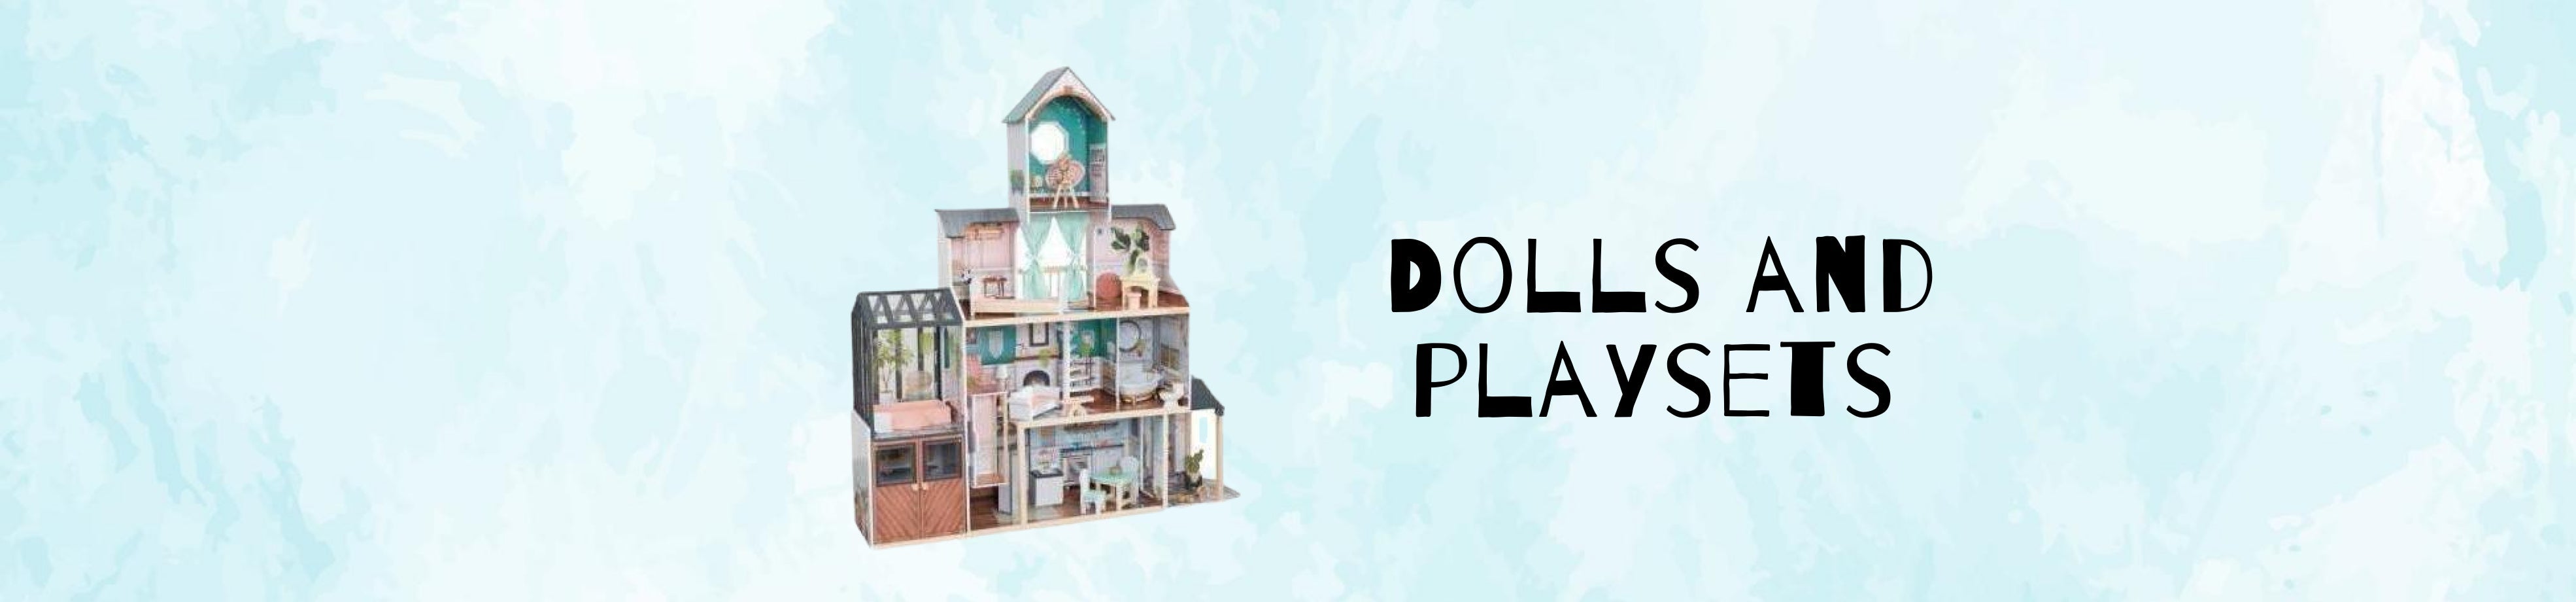 Doll House and Playsets for Dolls | Australia Delivery